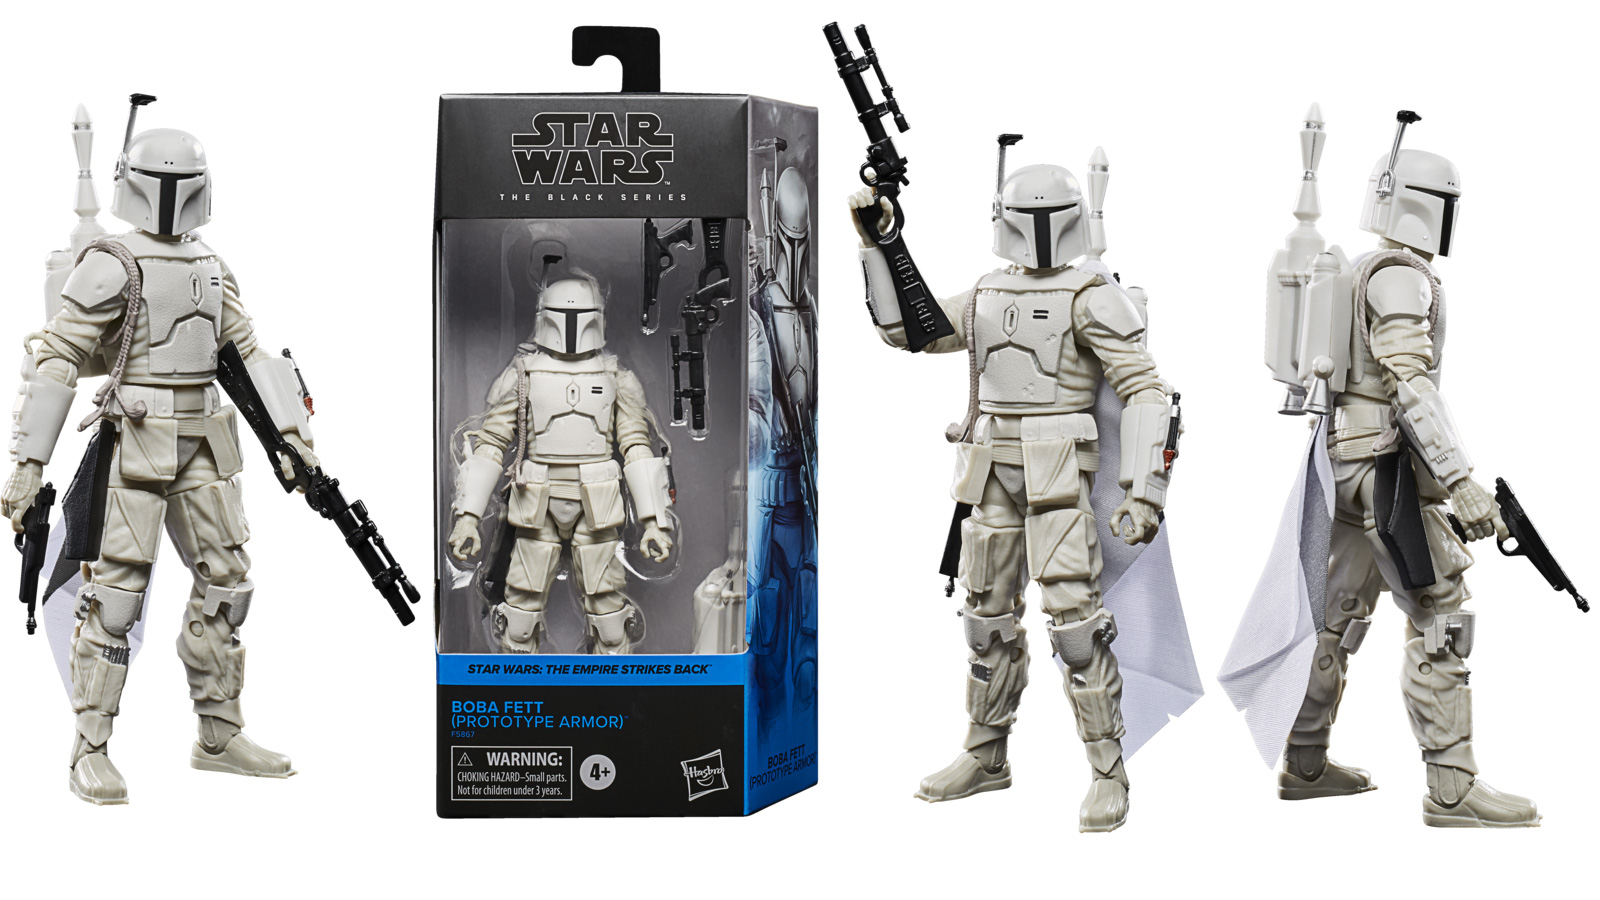 Press Release - Amazon Exclusive TBS 6-Inch TESB Boba Fett (Prototype Armor) Figure - Preorder 1/5 - With Preorder Link